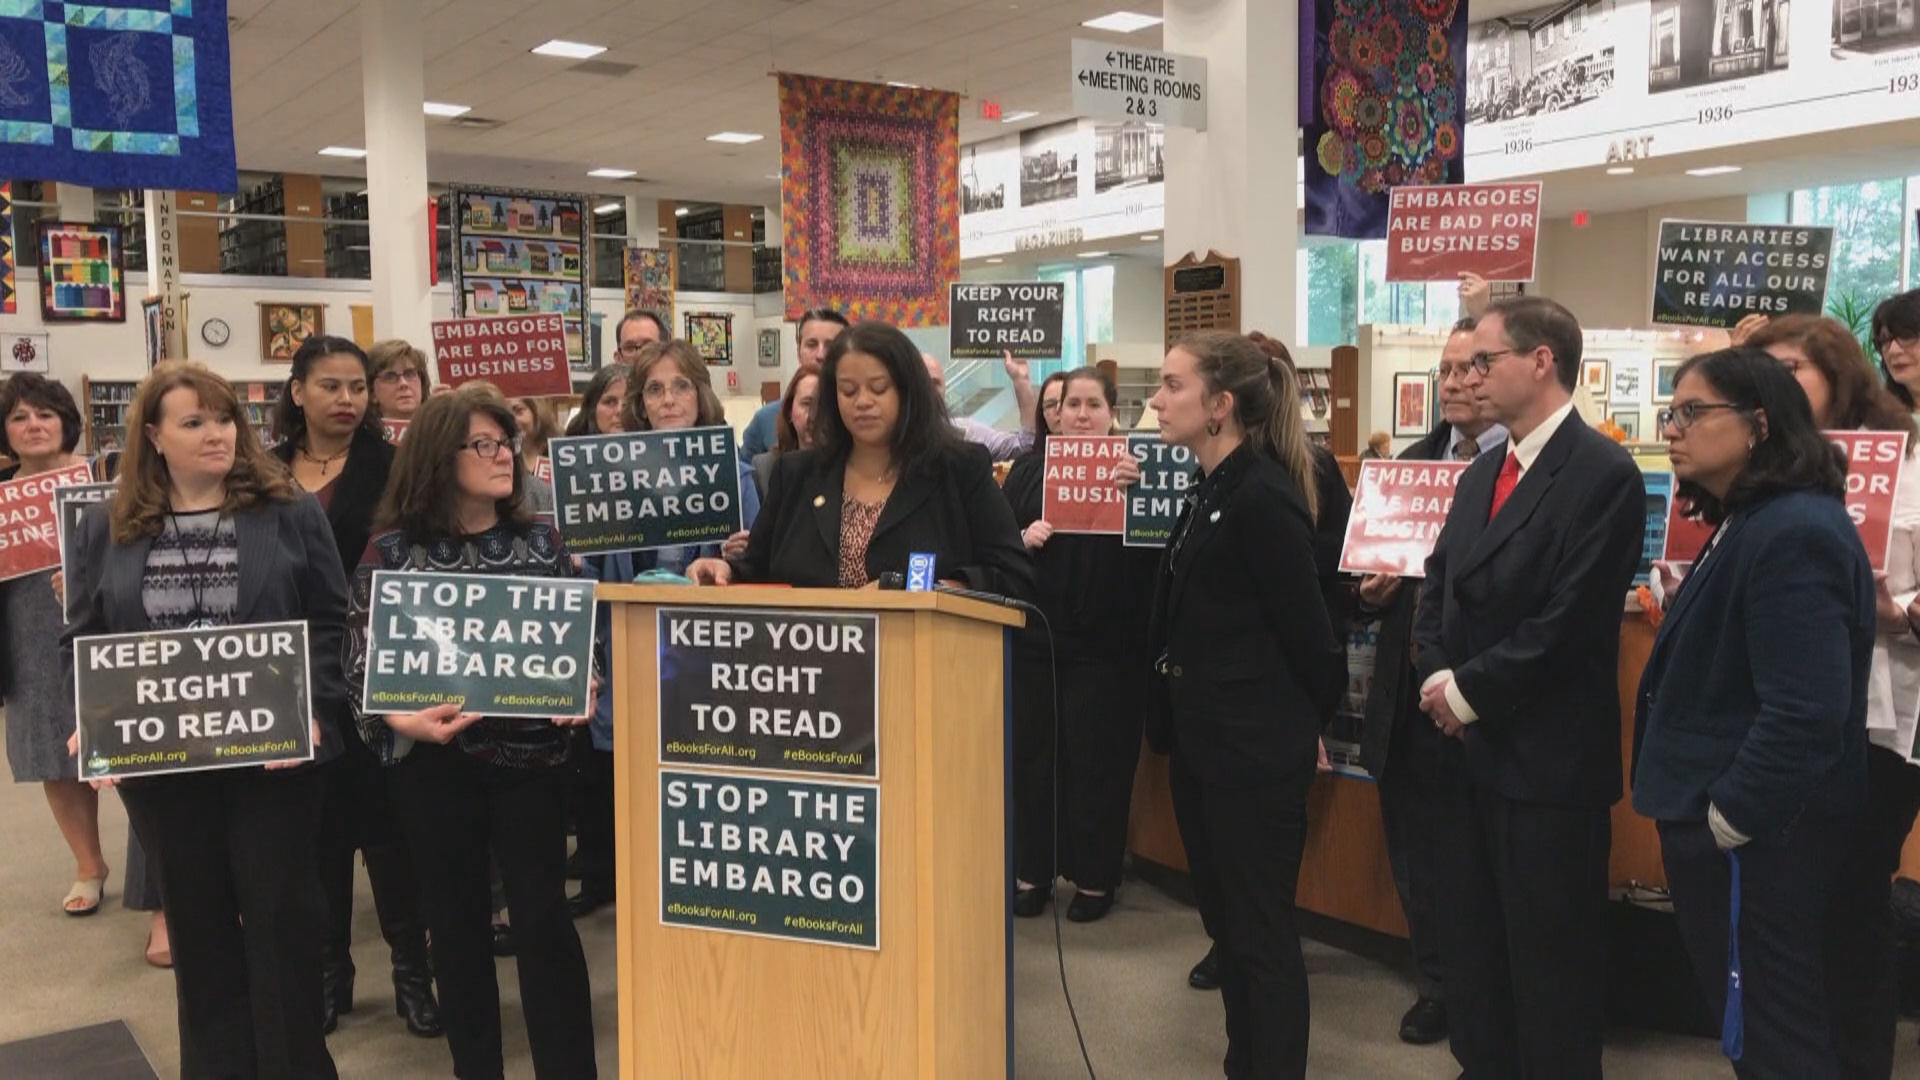 Solages Joins LI Library Leaders & Advocates to Denounce New e-book Licensing Model